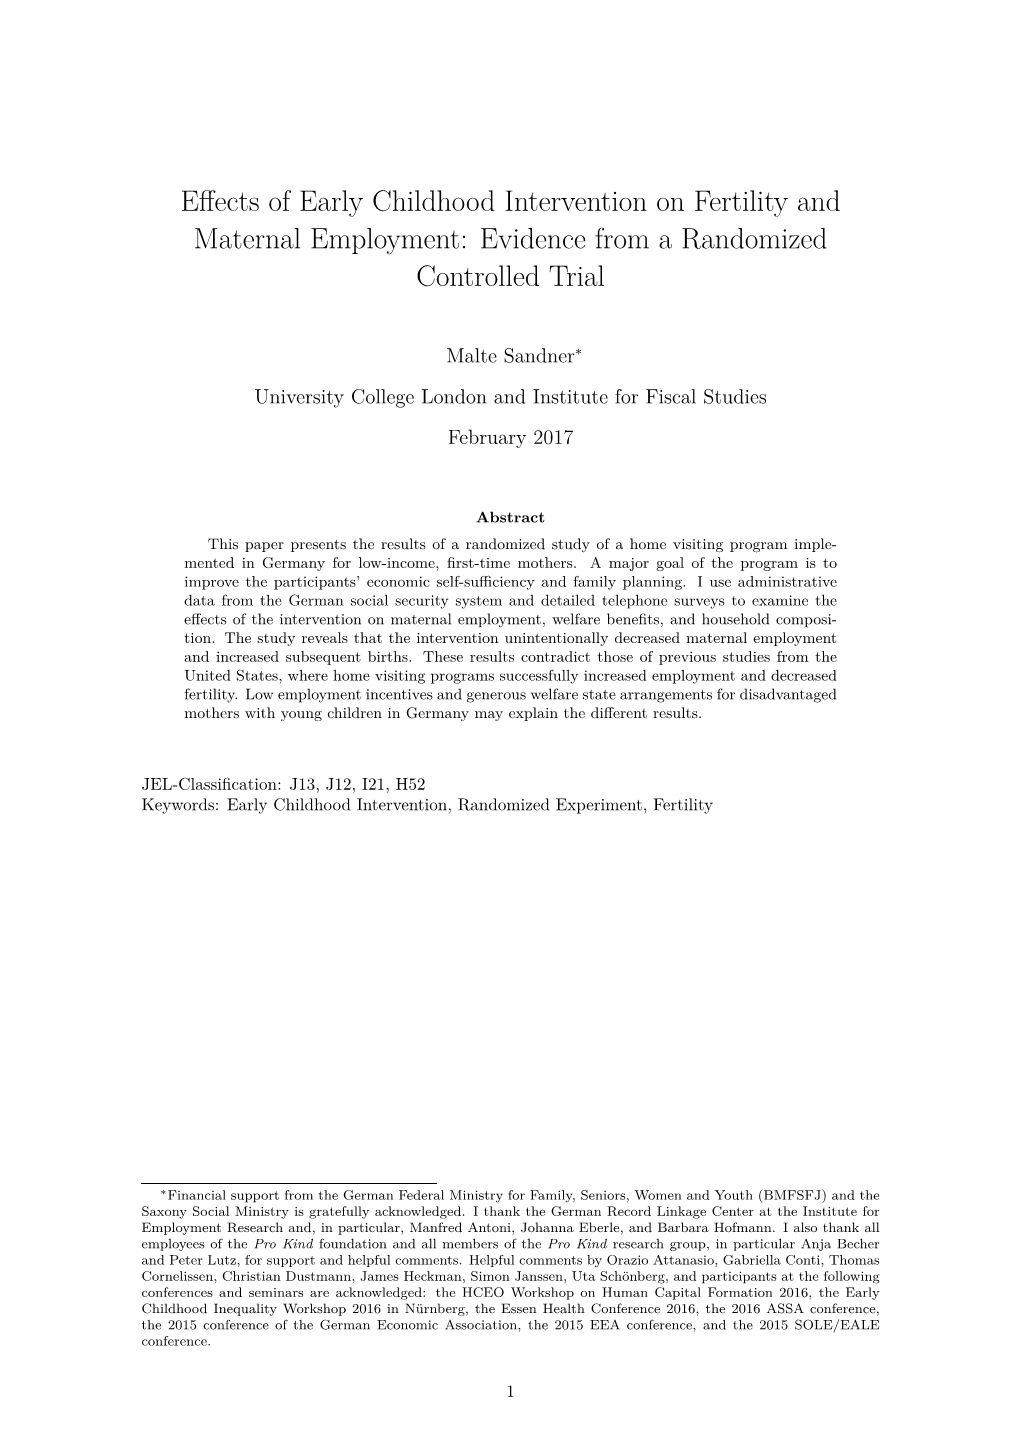 Effects of Early Childhood Intervention on Fertility and Maternal Employment